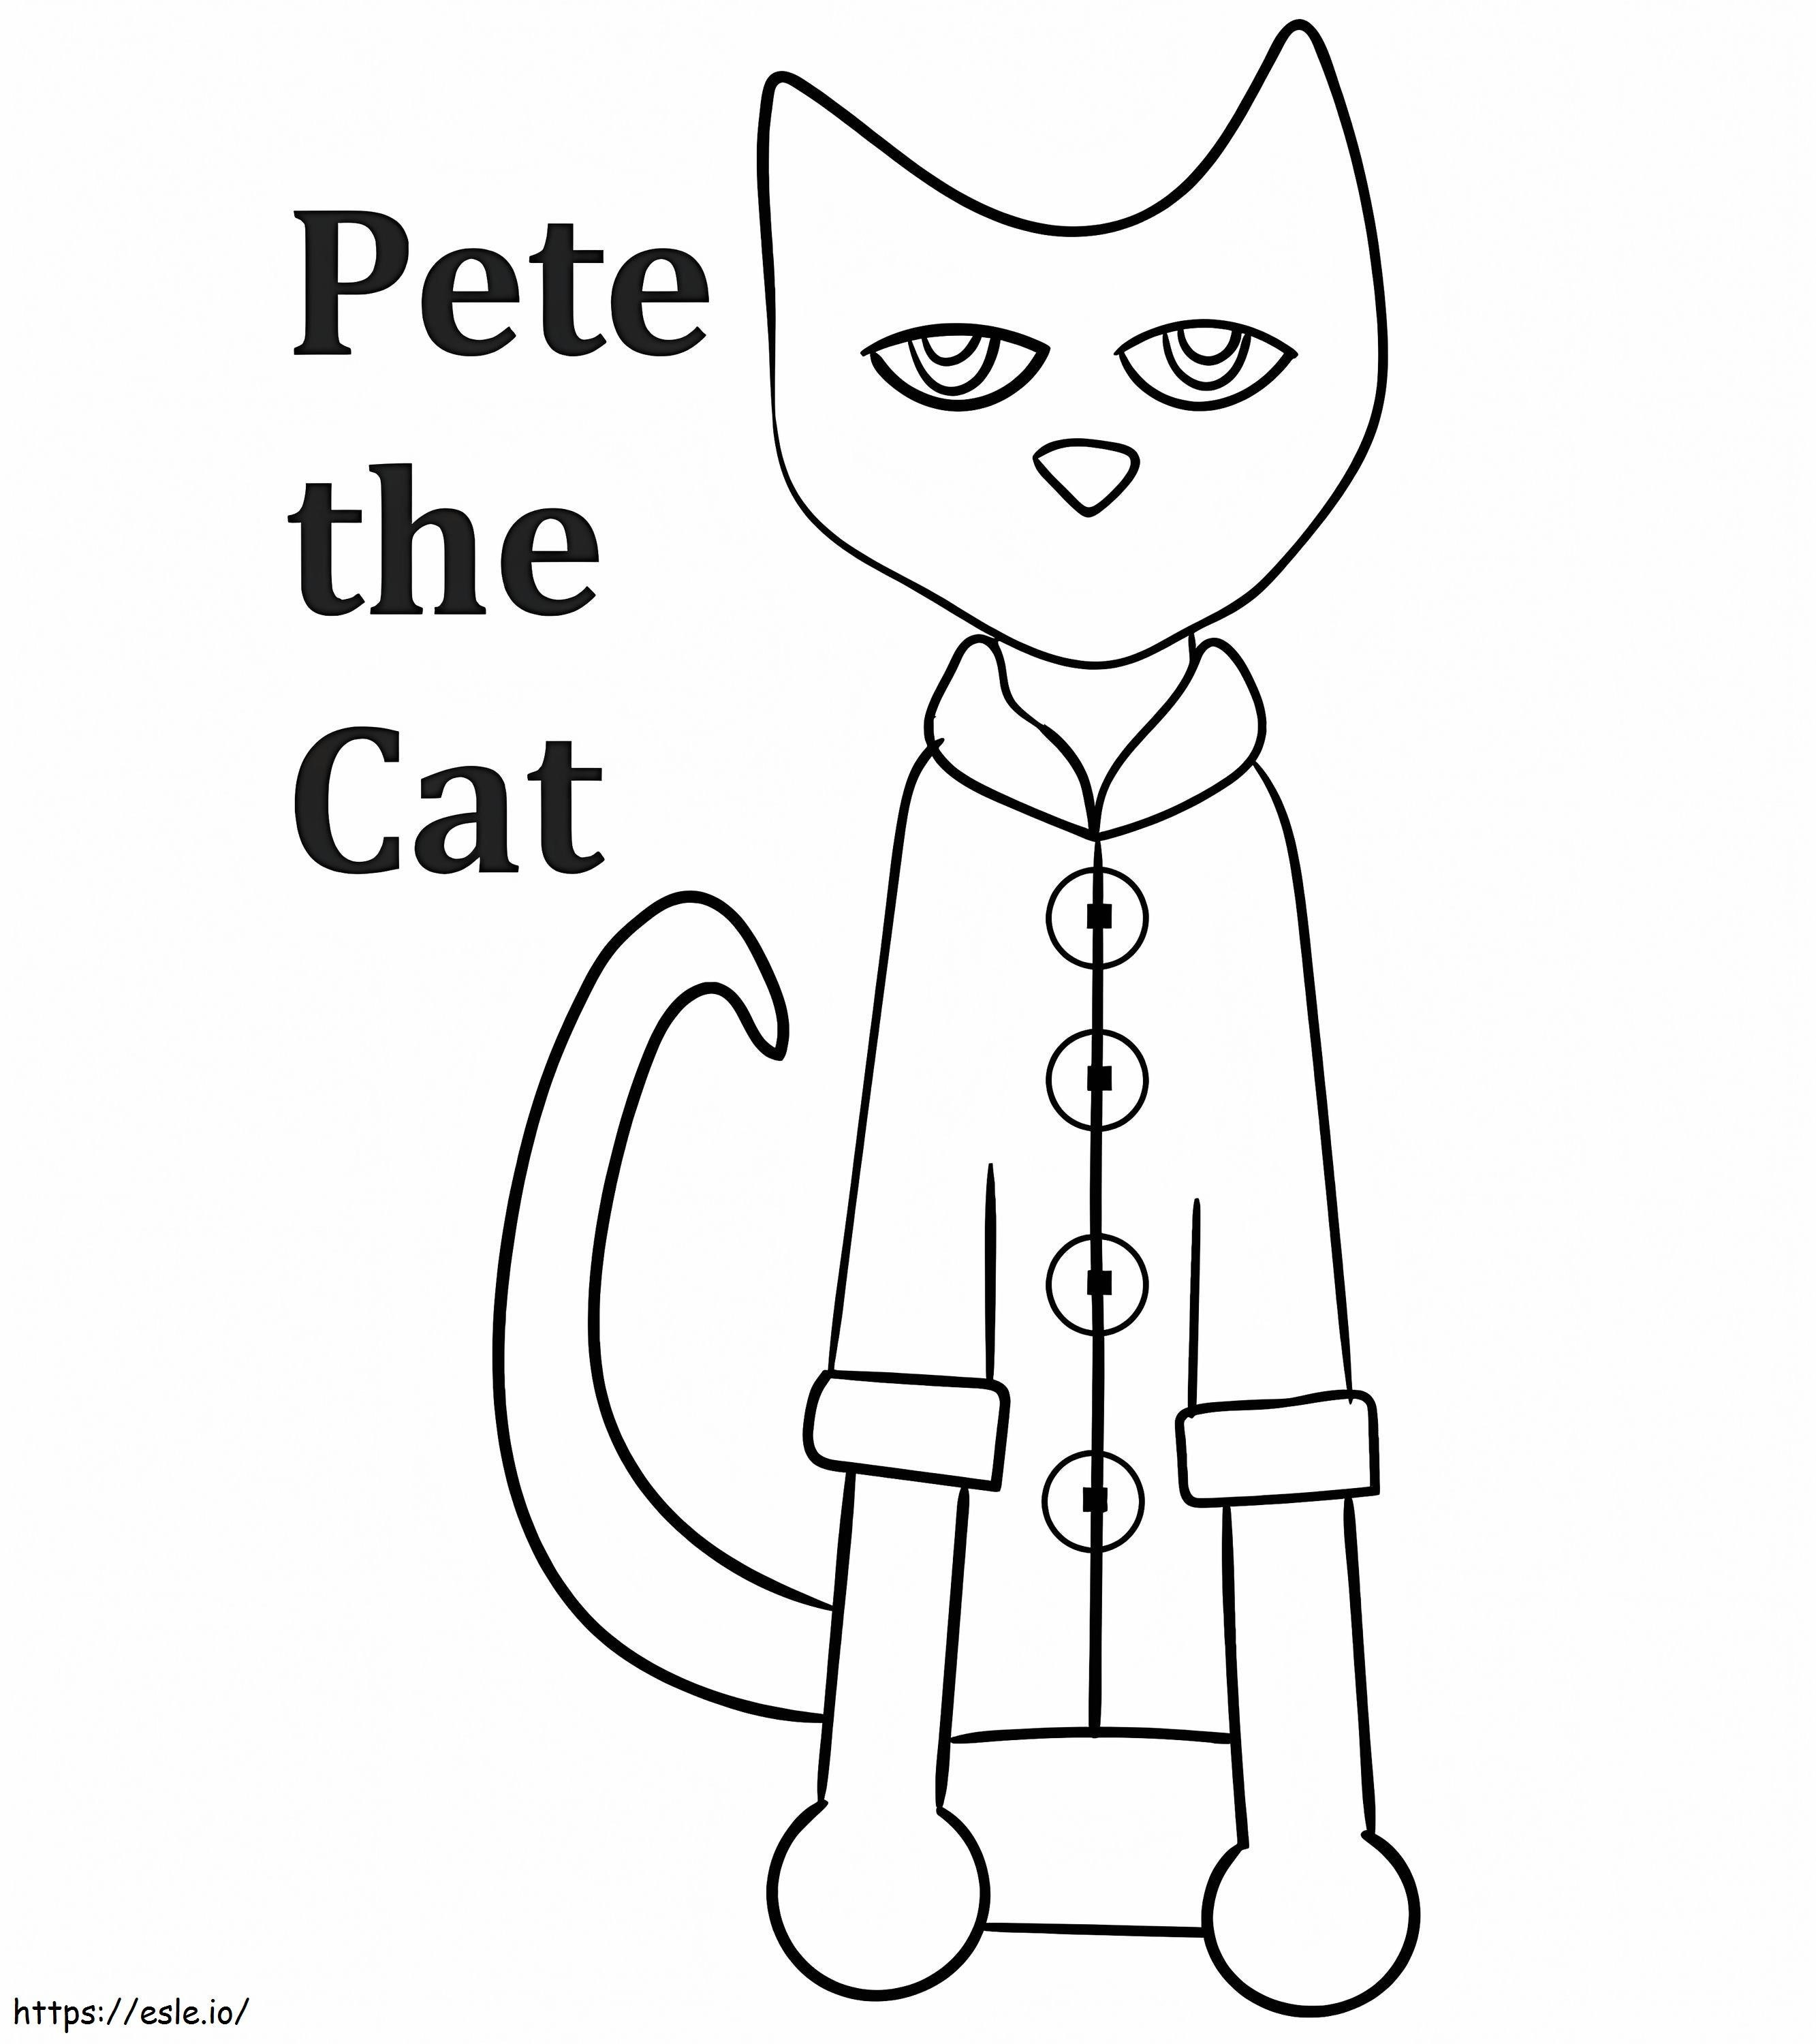 Pete The Cat coloring page